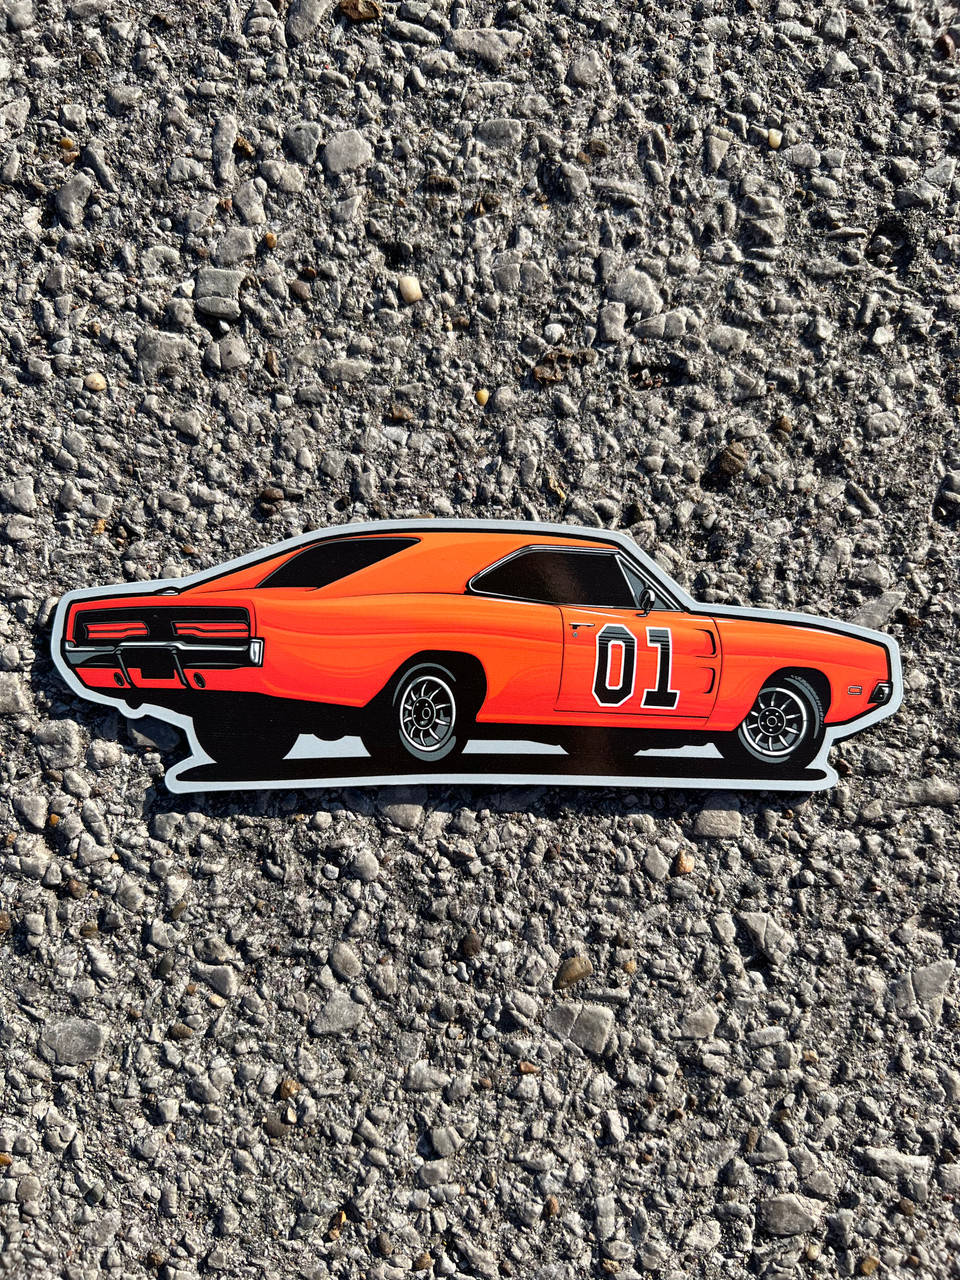 Iconic 1969 Dodge Charger 'General Lee' Wallpaper